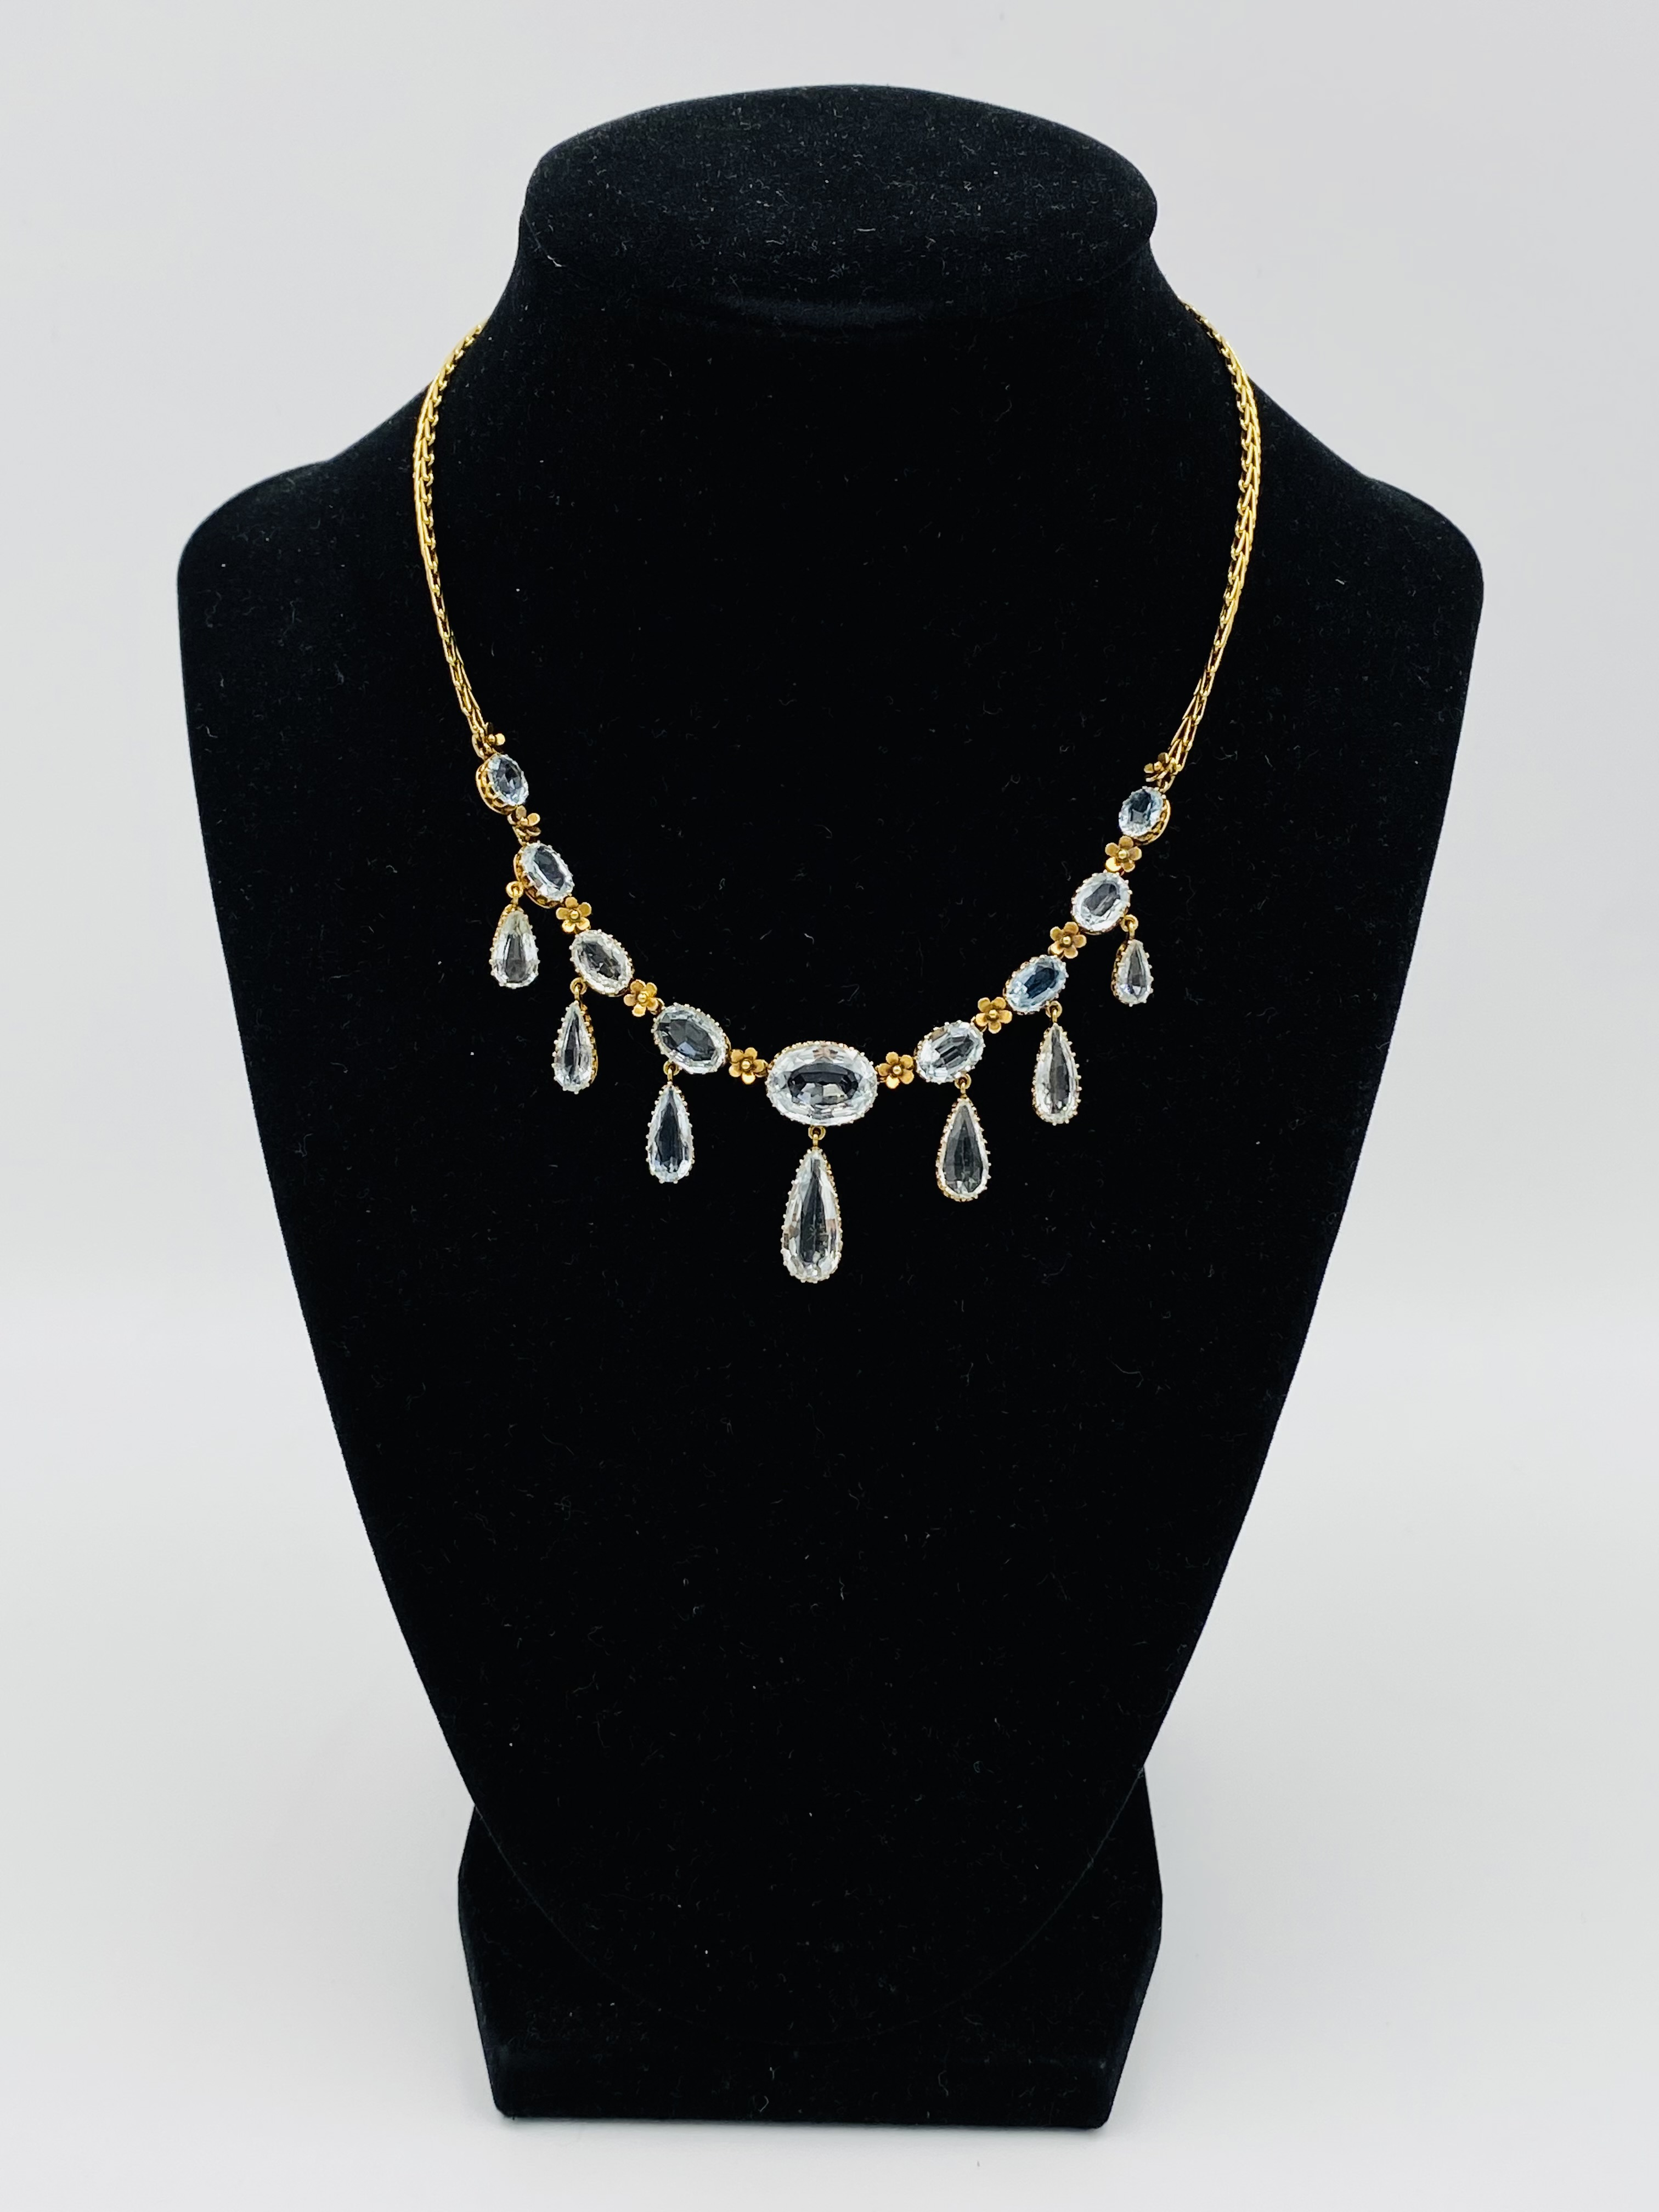 18ct gold and aquamarine necklace by Mrs. Newman